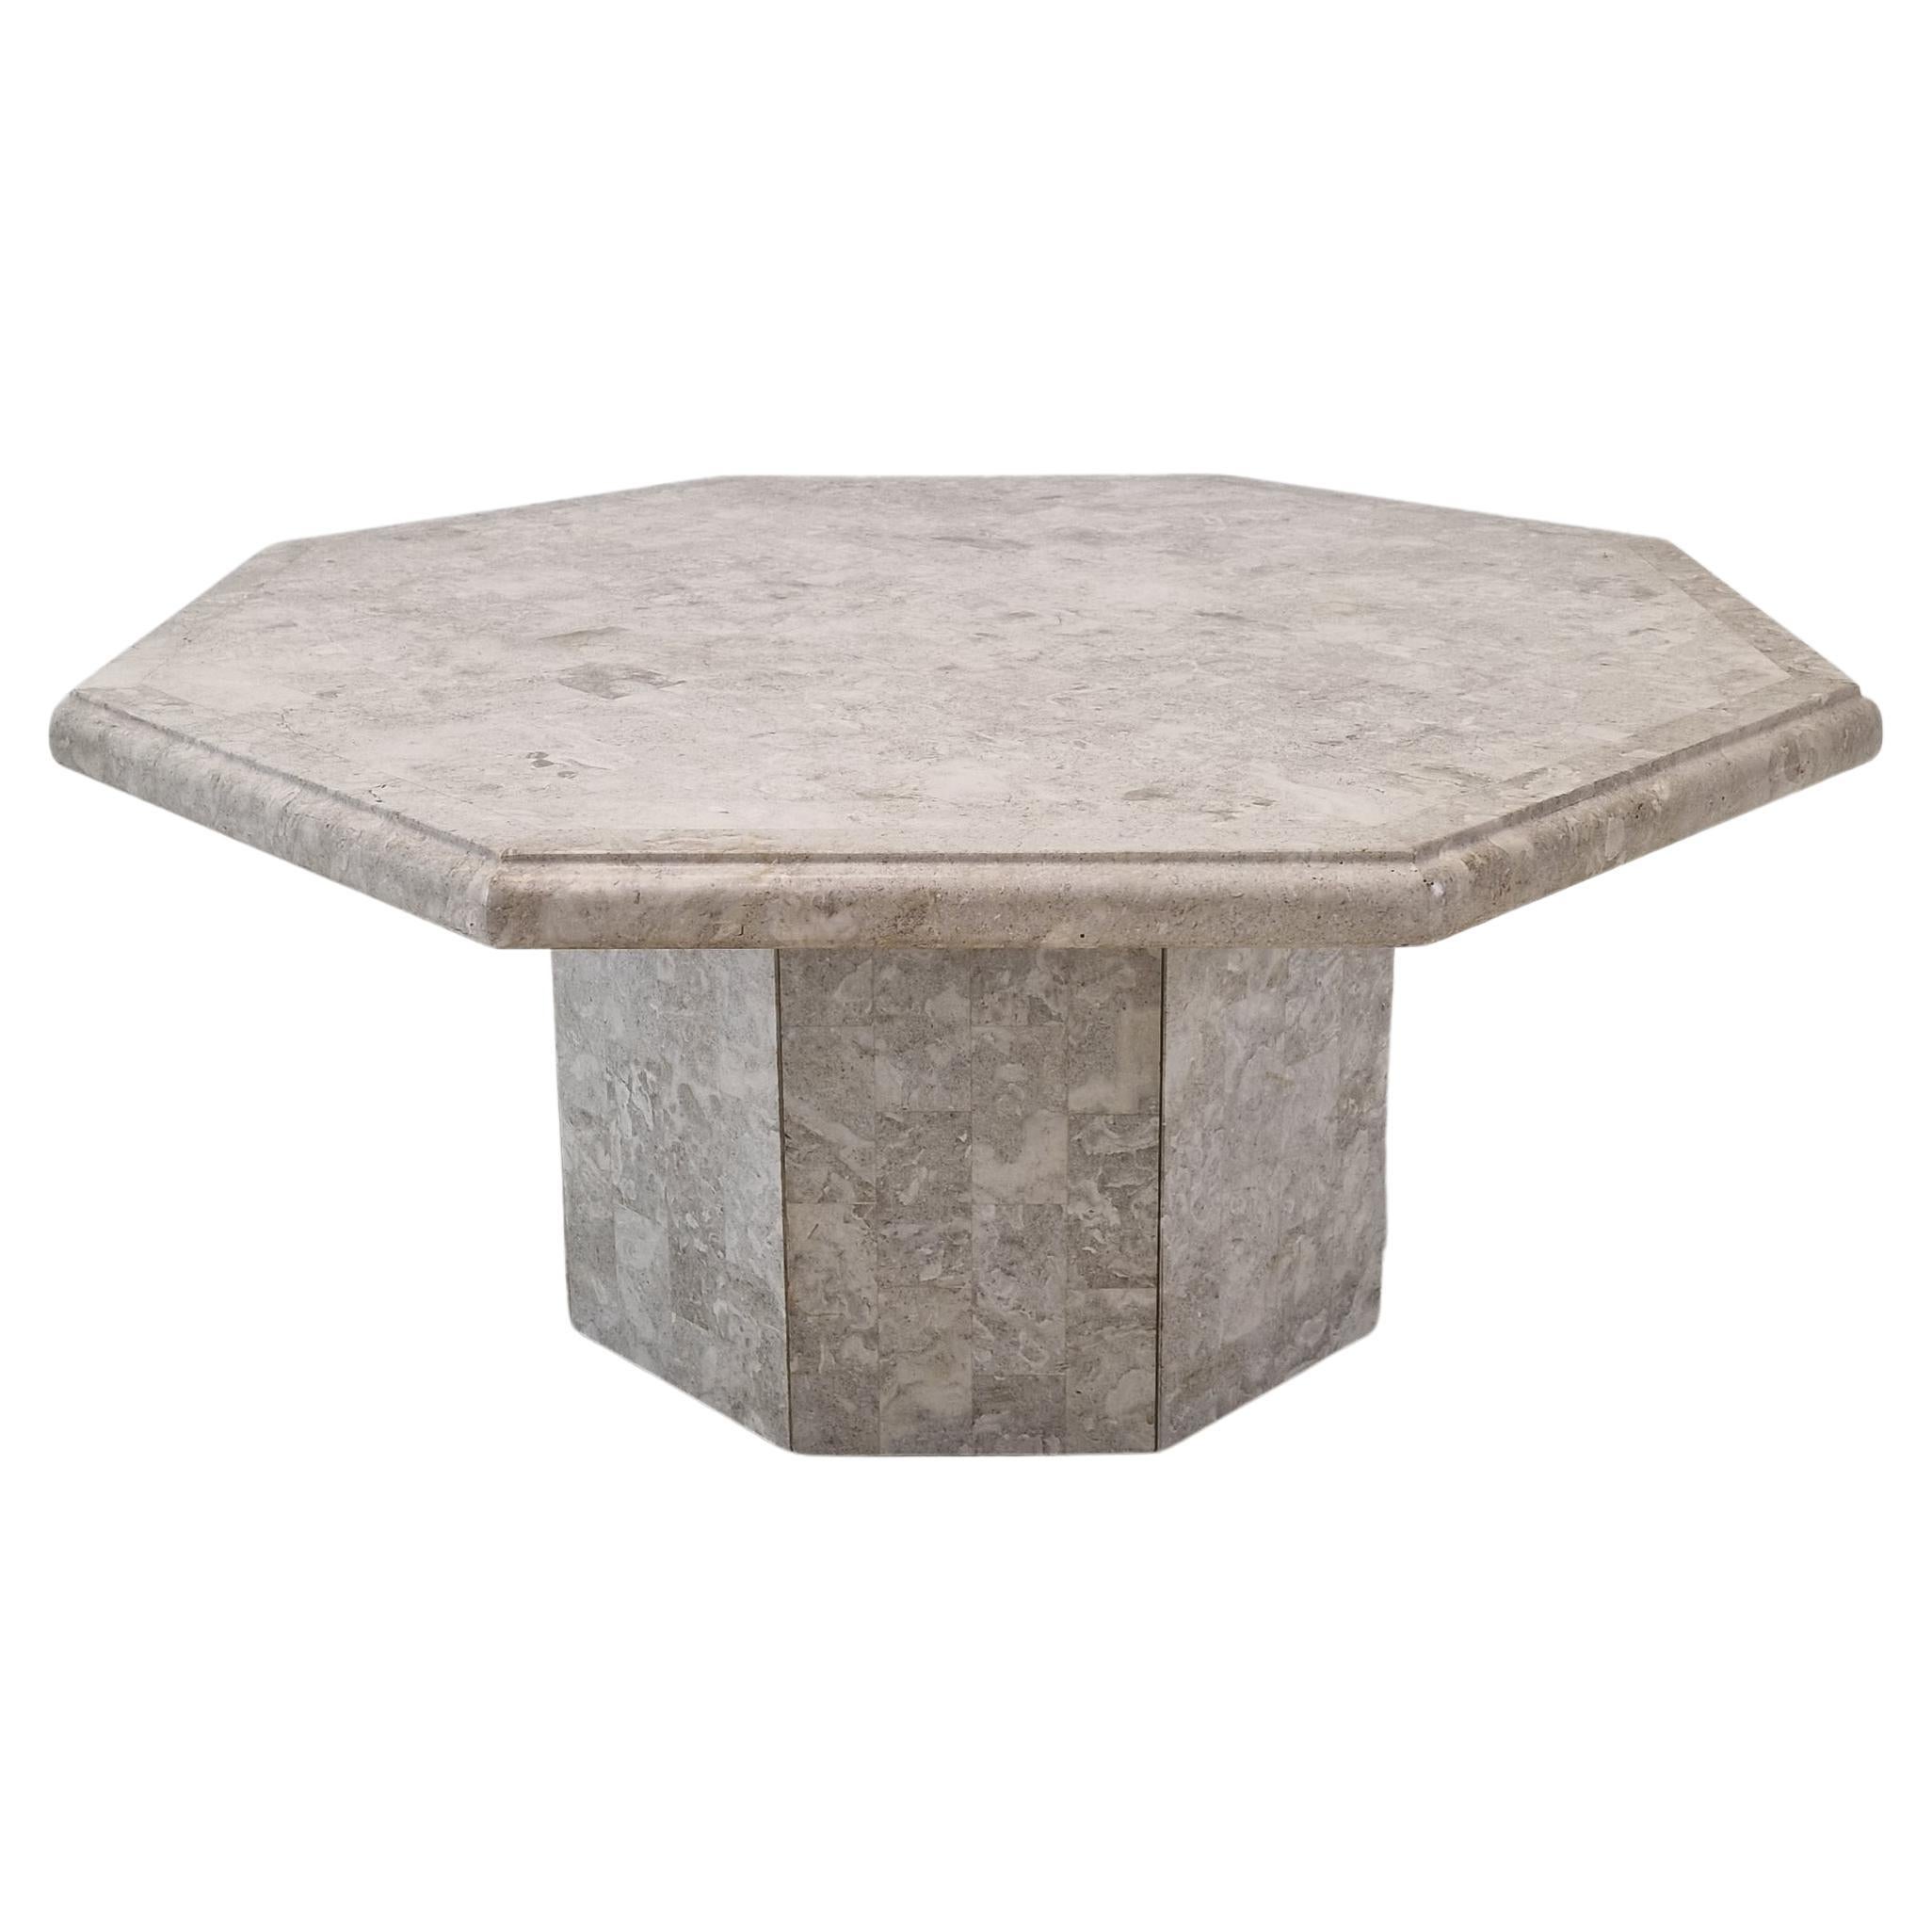 Mactan Octagon Stone or Fossil Stone Coffee Table, 1980s